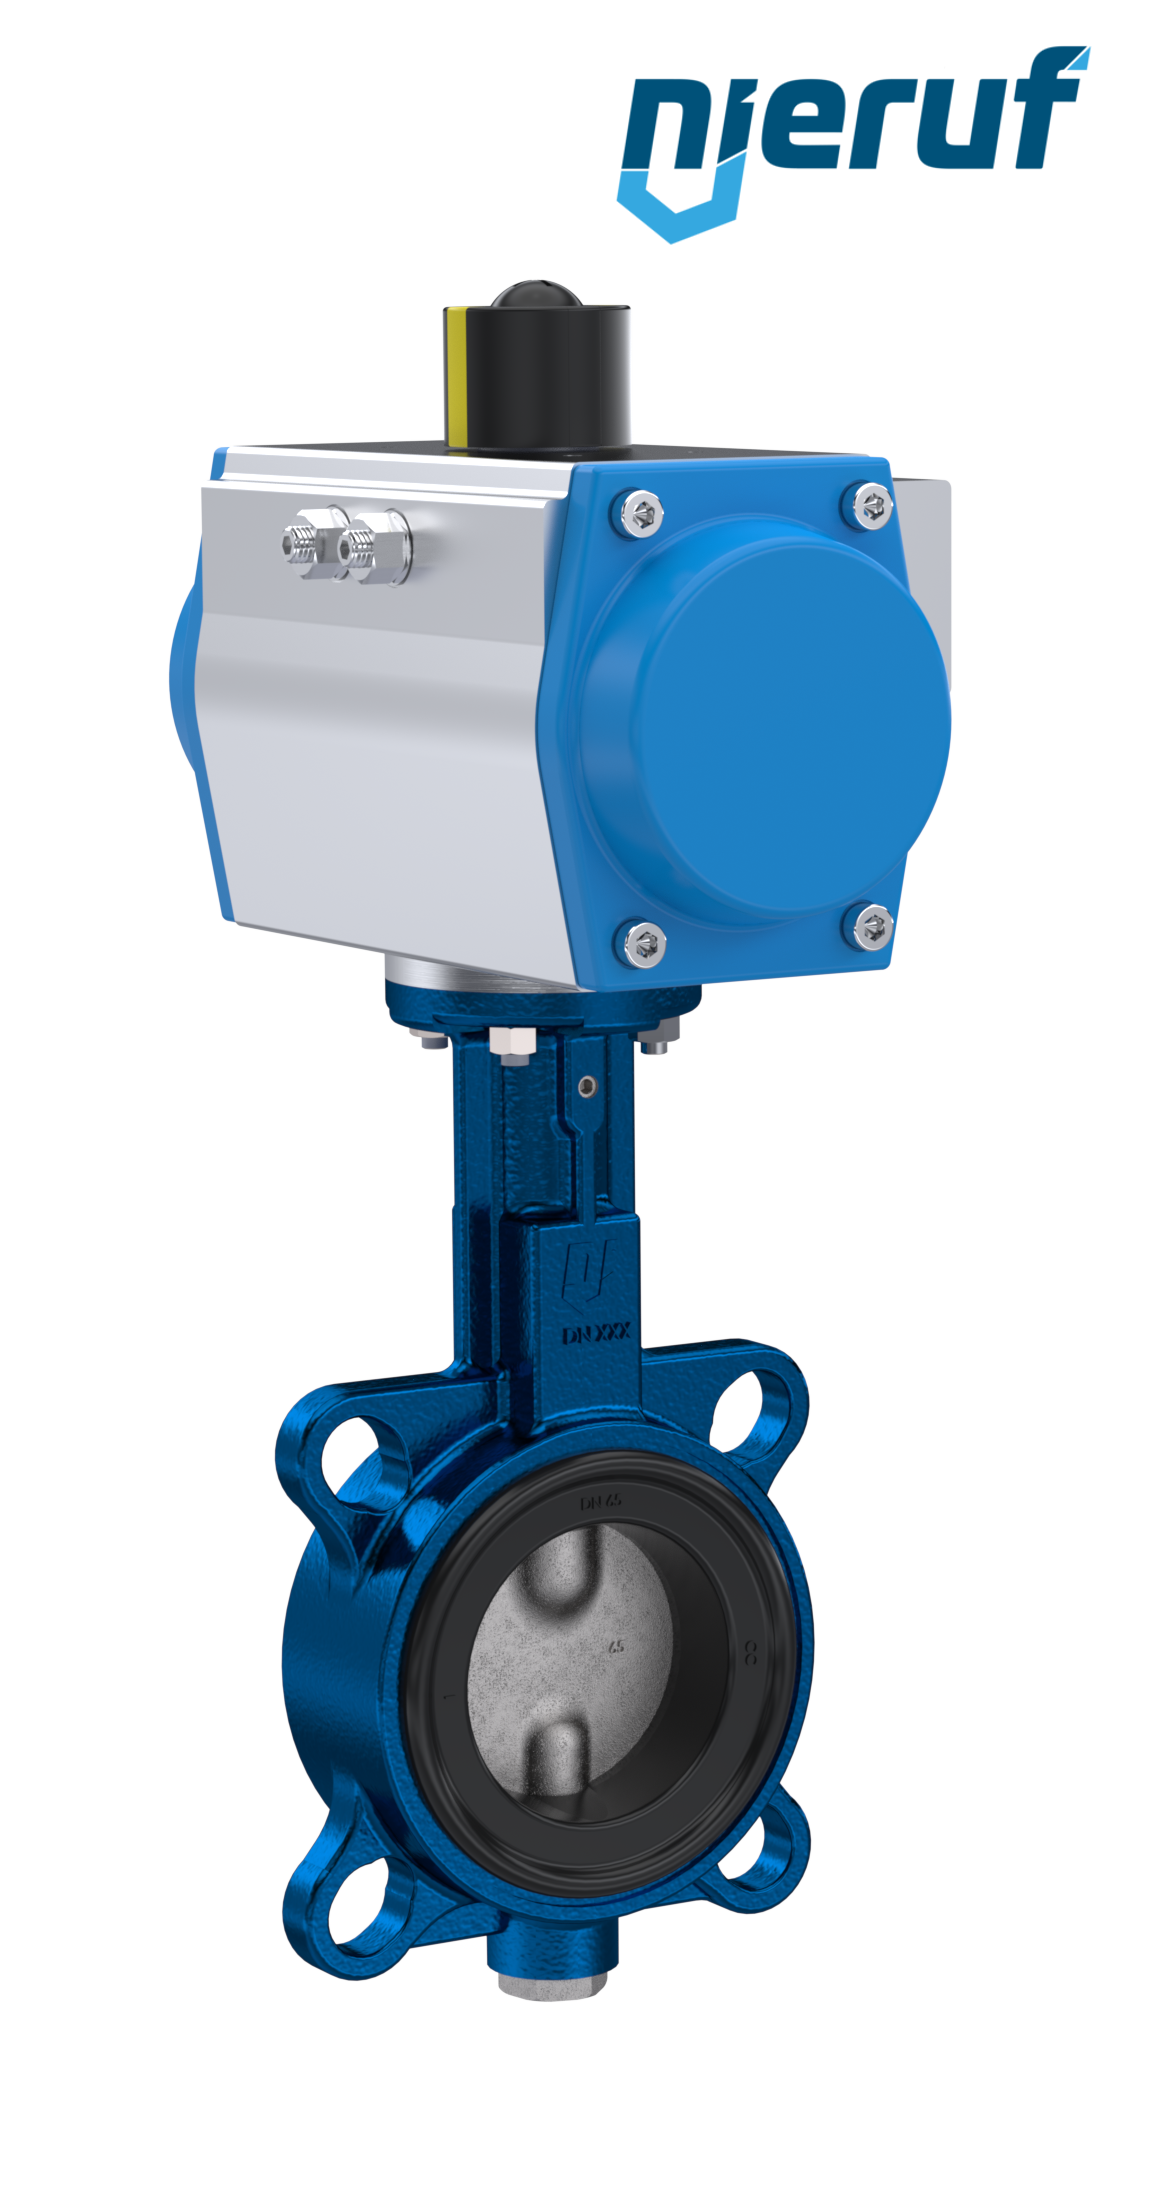 Butterfly valve DN 65 AK01 EPDM DVGW drinking water, WRAS, ACS, W270 pneumatic actuator single acting